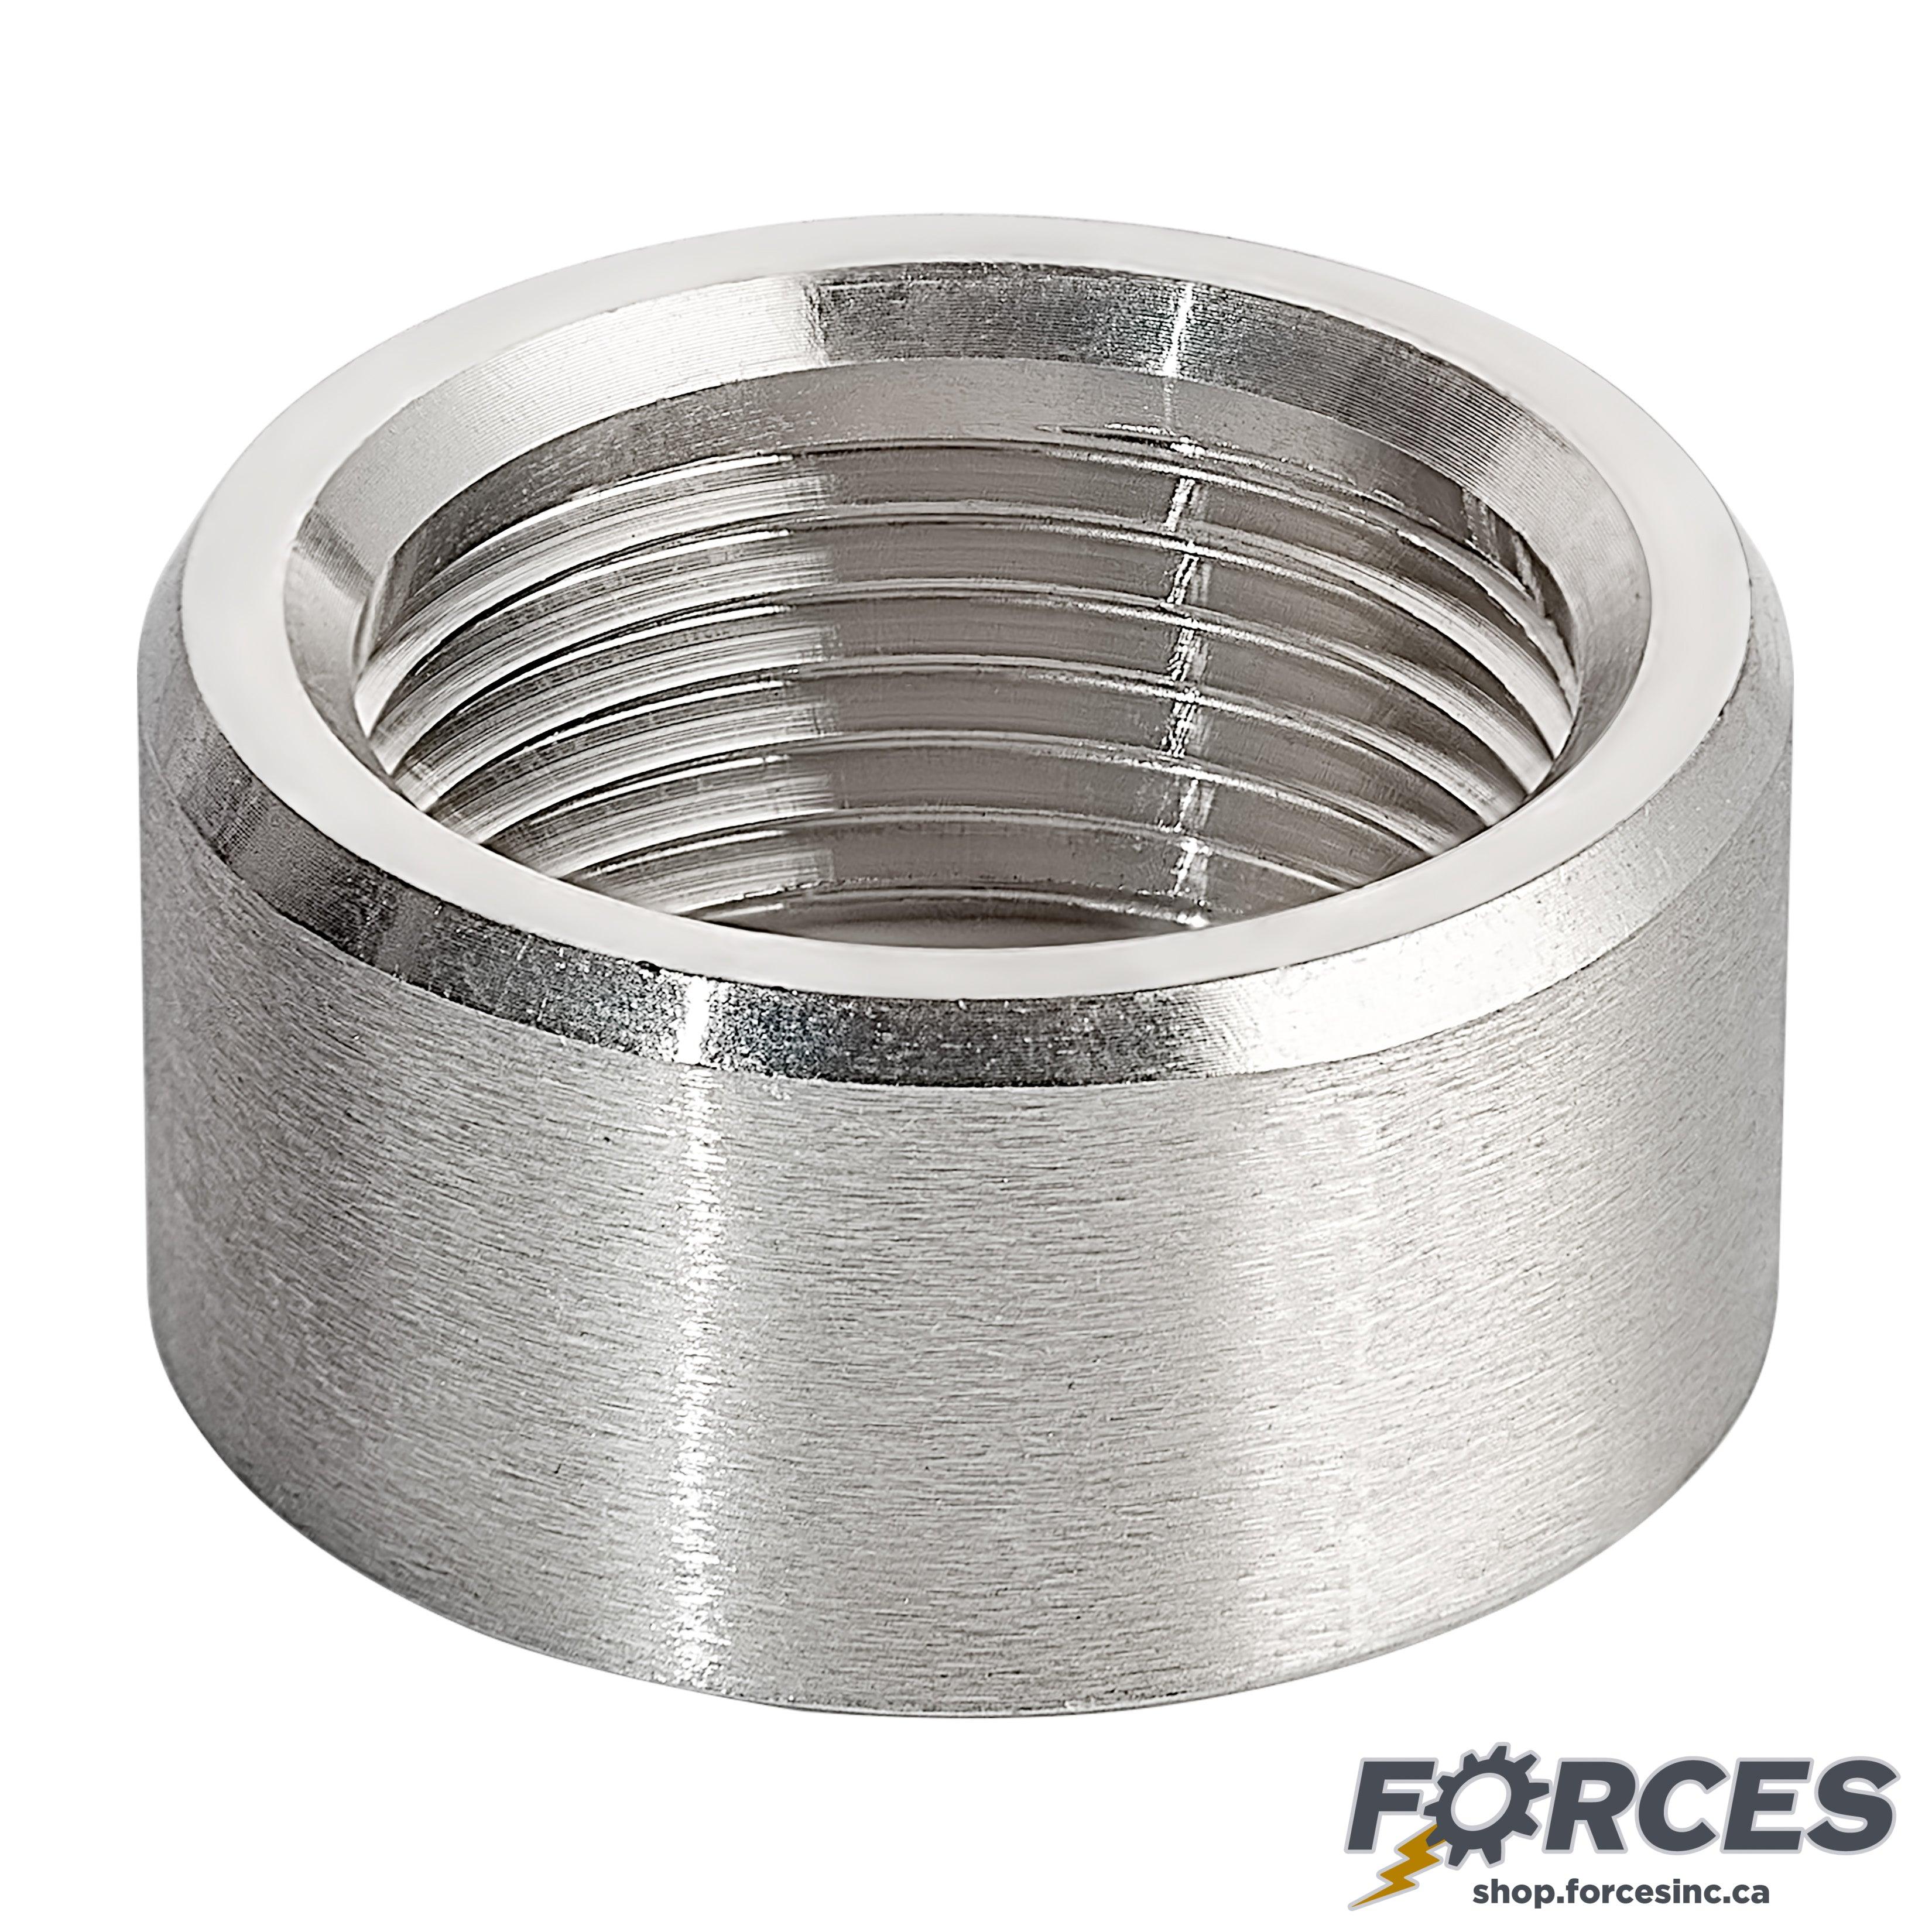 2-1/2" Half-Coupling NPT #150 - Stainless Steel 316 - Forces Inc